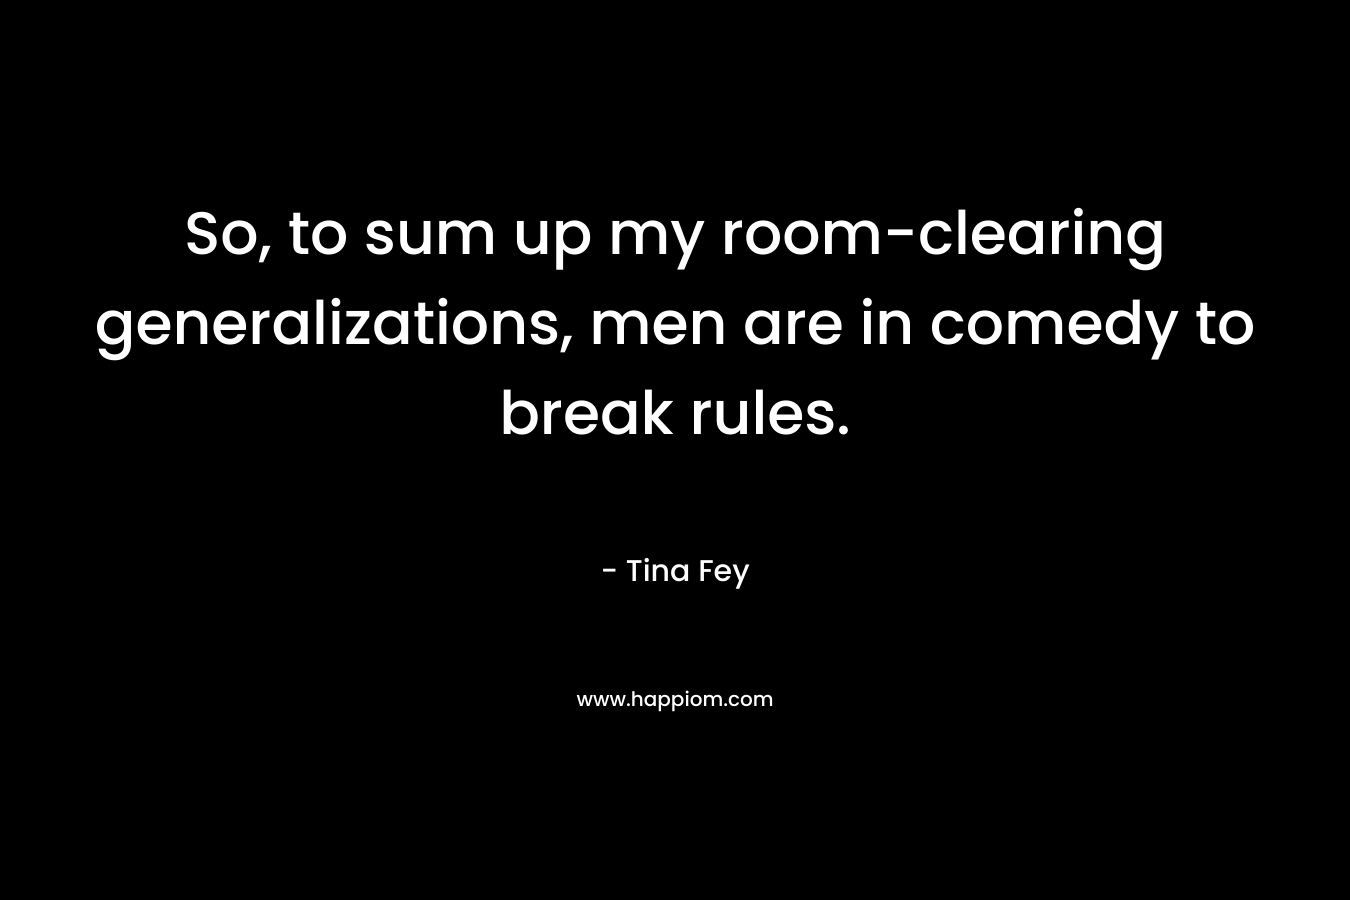 So, to sum up my room-clearing generalizations, men are in comedy to break rules. – Tina Fey